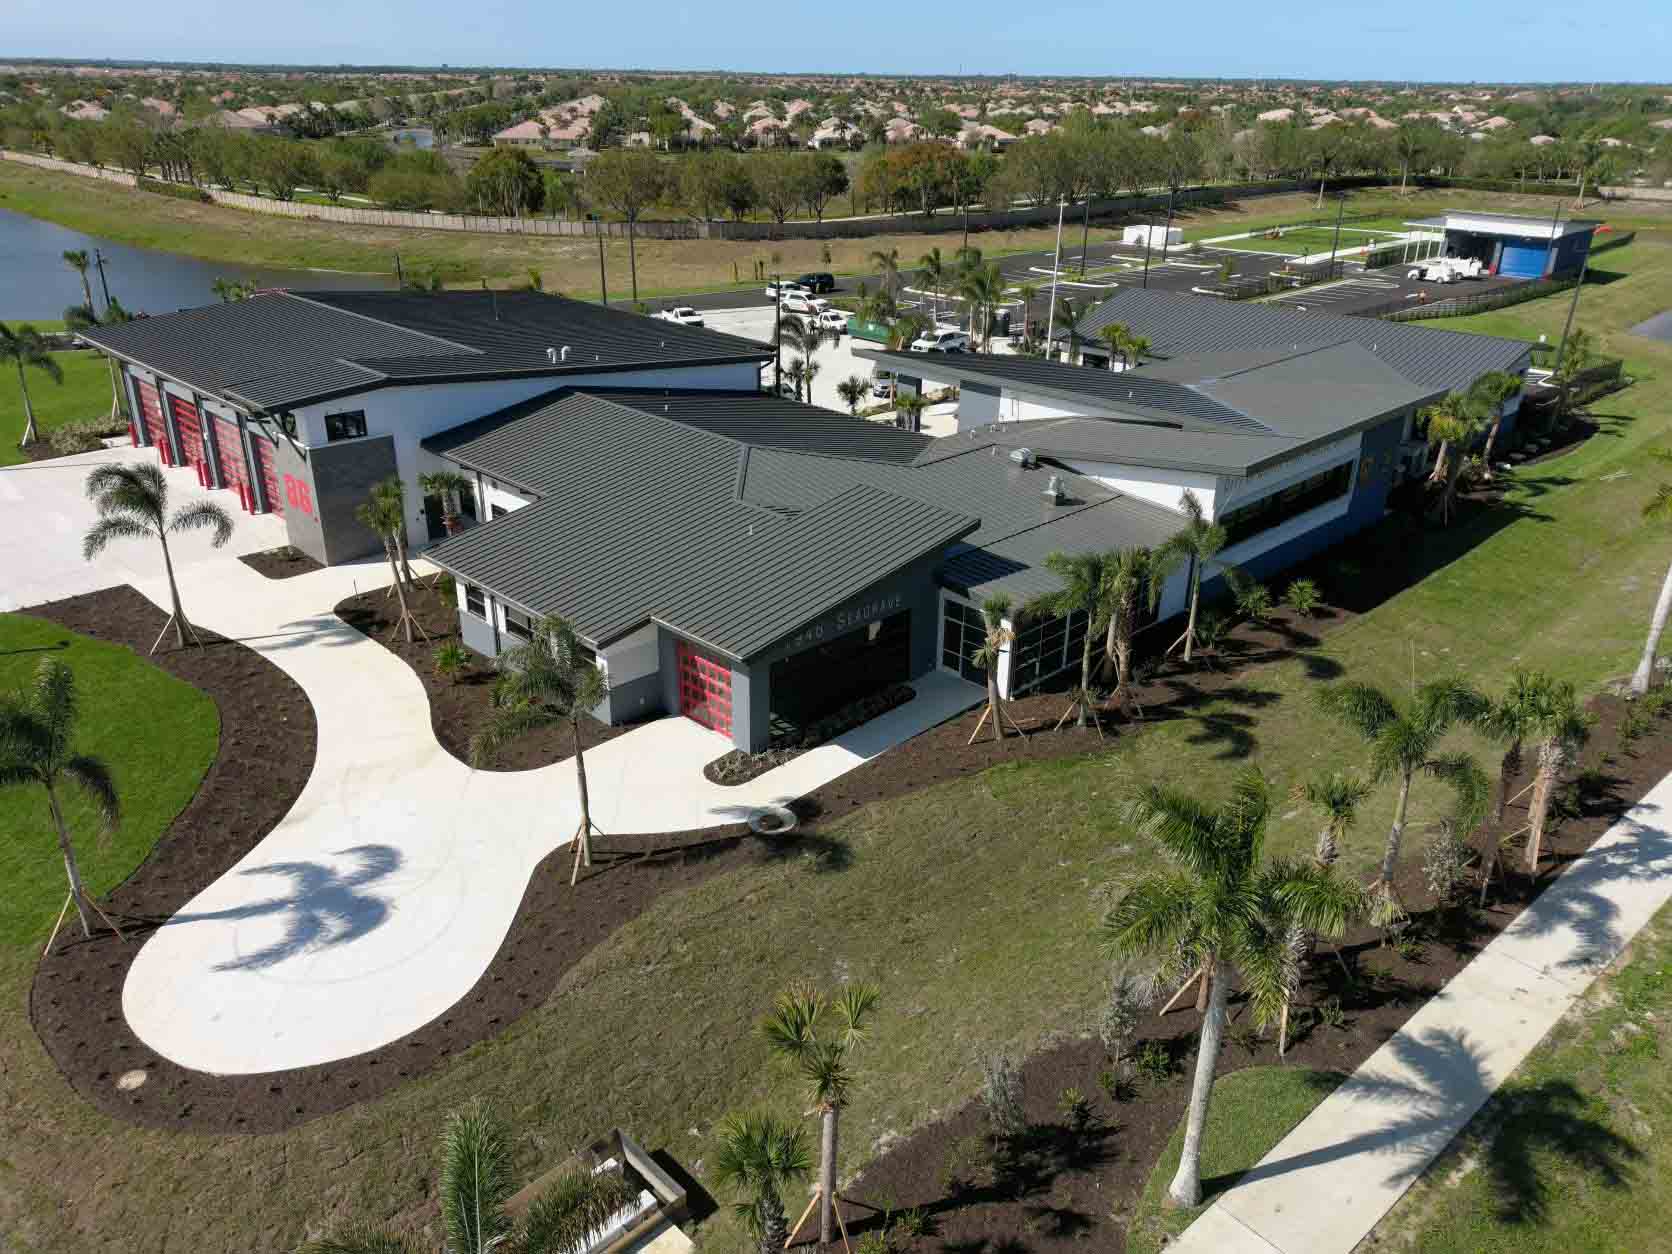 The New Wellen Park And City Of North Port Public Safety Building Is Home To North Port Fire Station 86 A North Port Police Annex And Sarasota County Fire Station 26. ?x43126